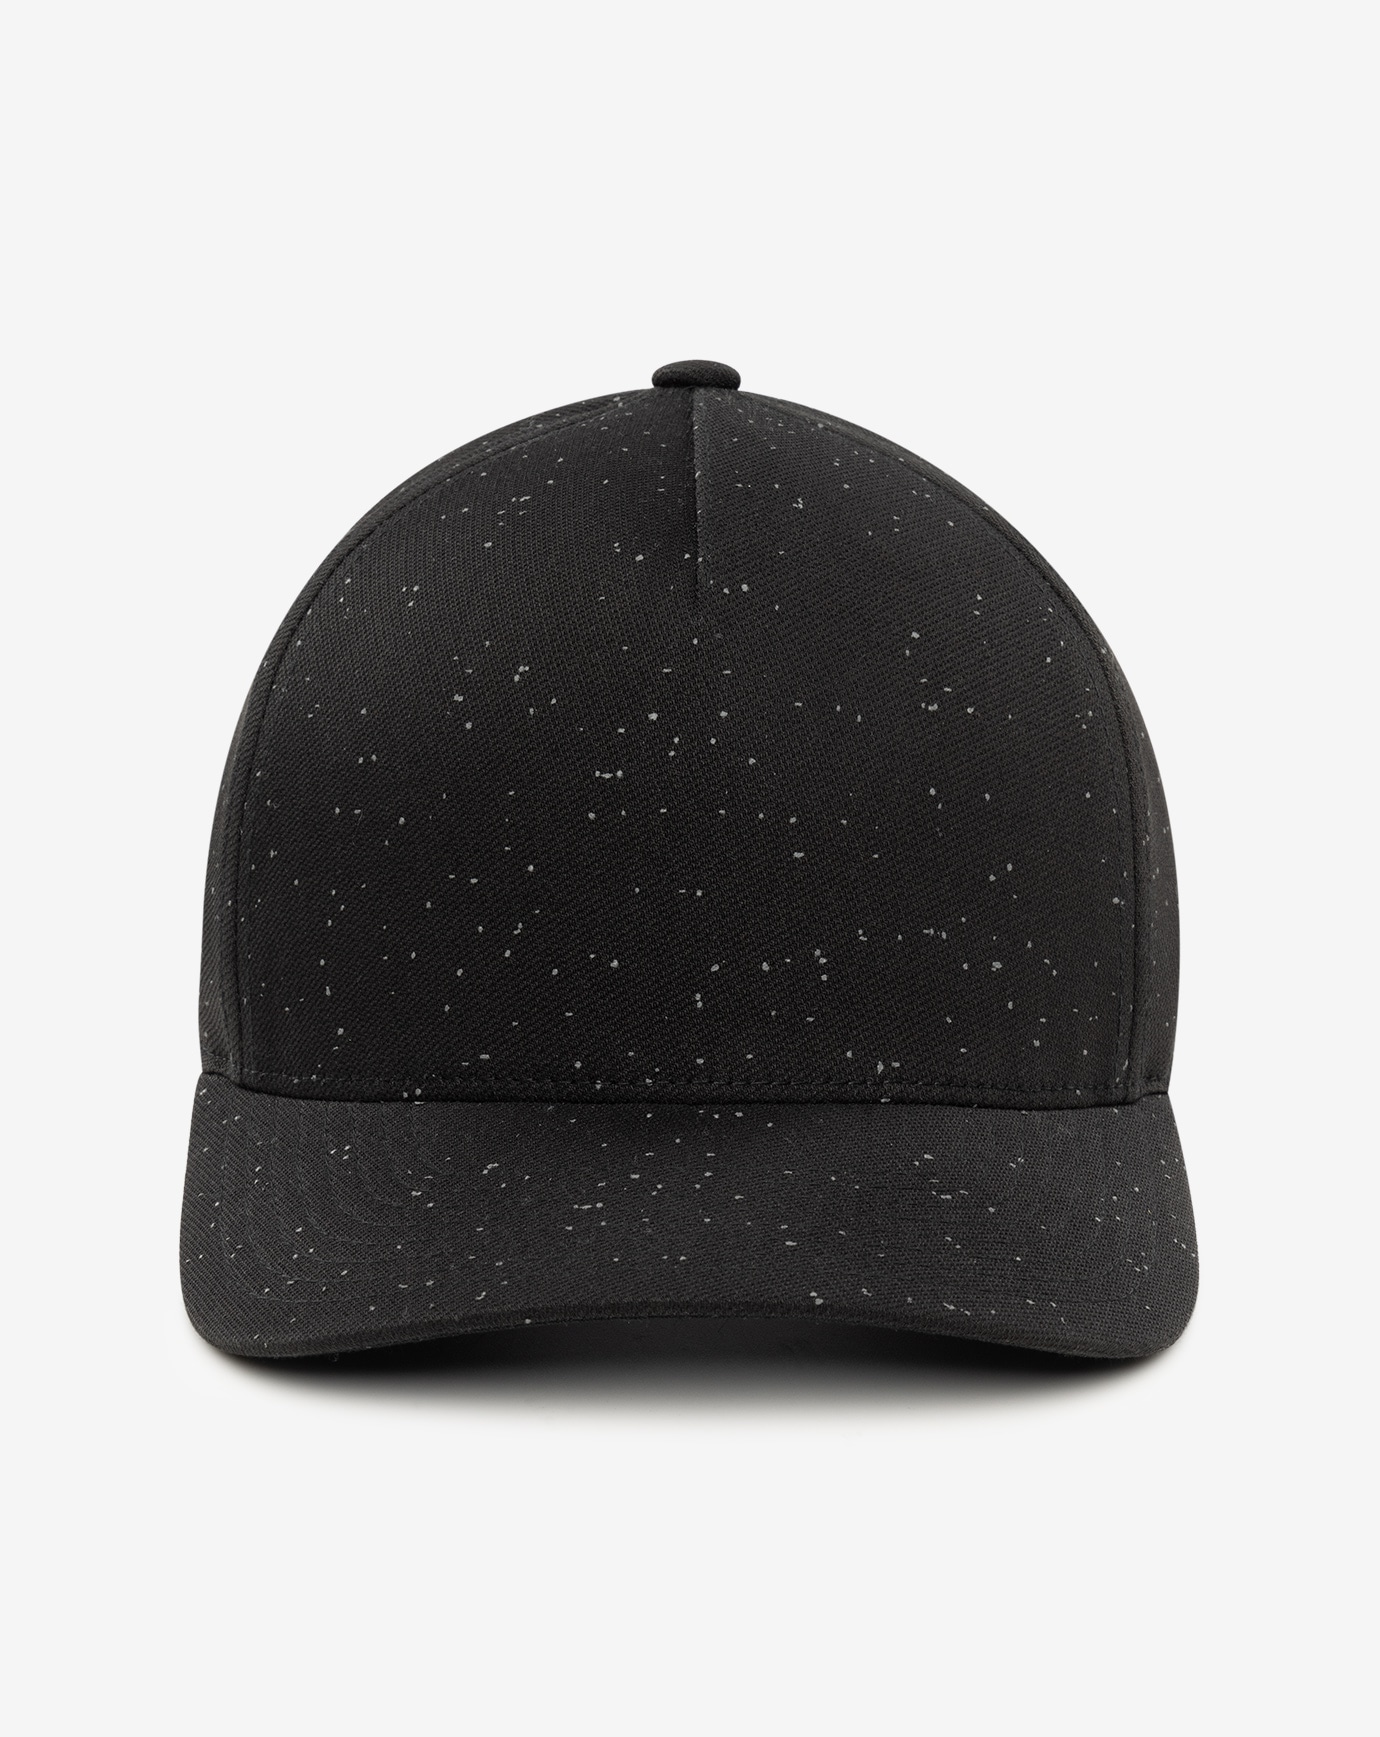 Related Product - ECLIPSE PRINT SNAPBACK HAT